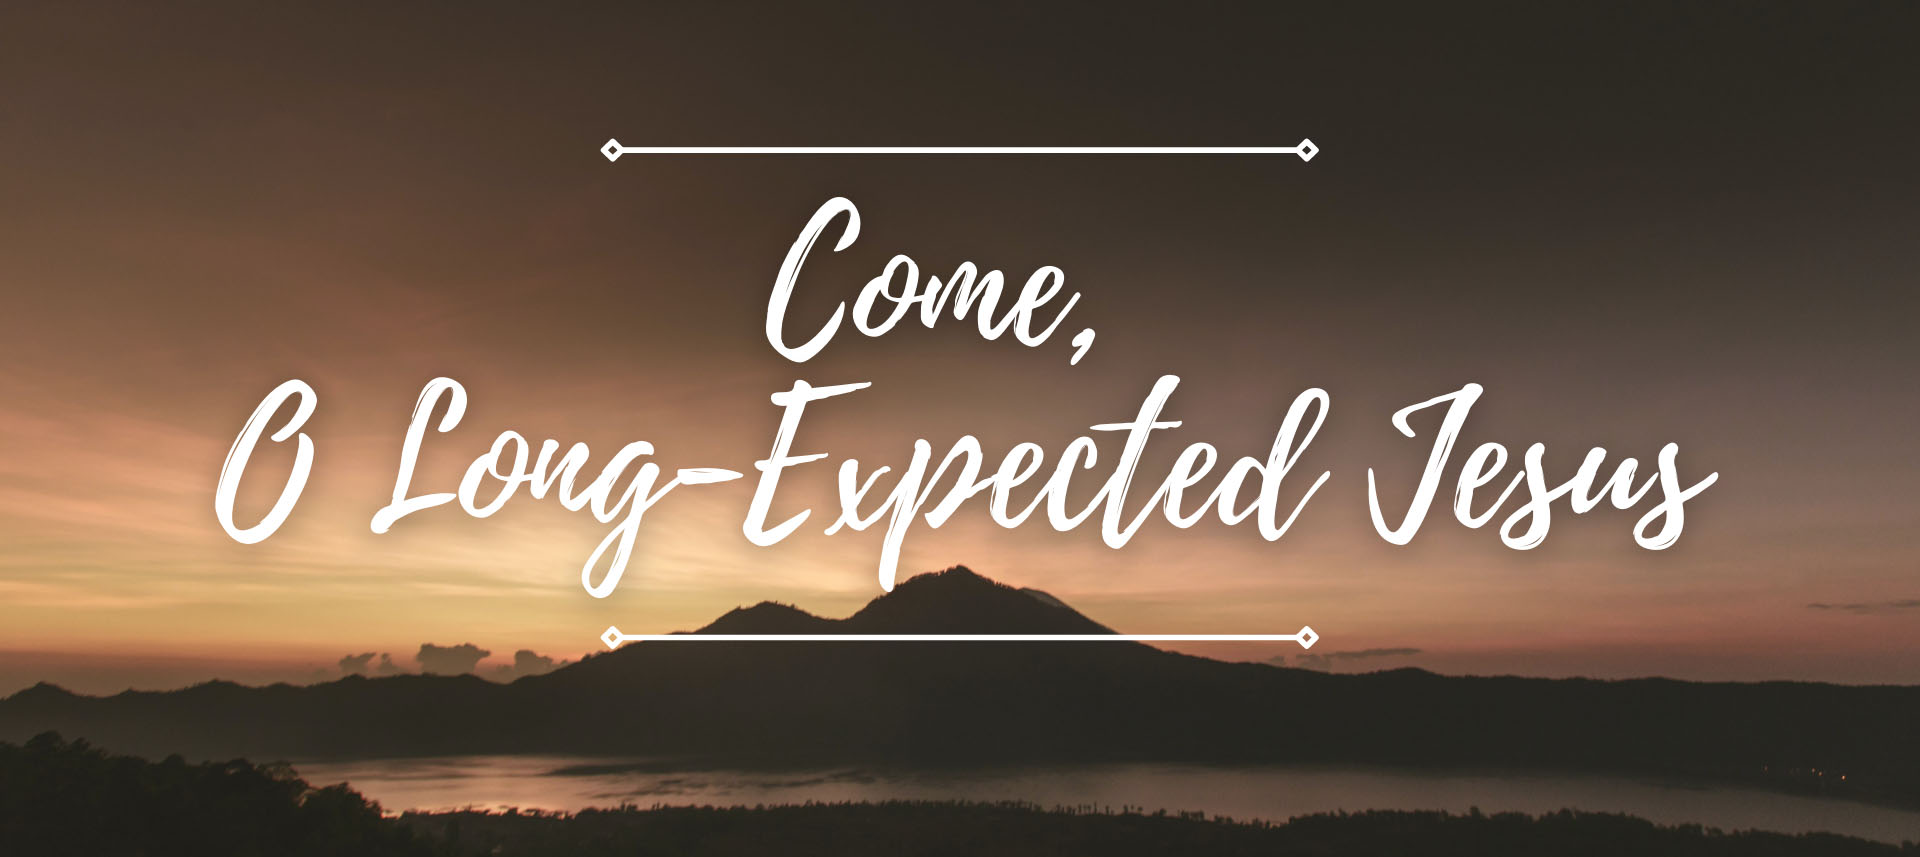 O, Come Long-Expected Jesus